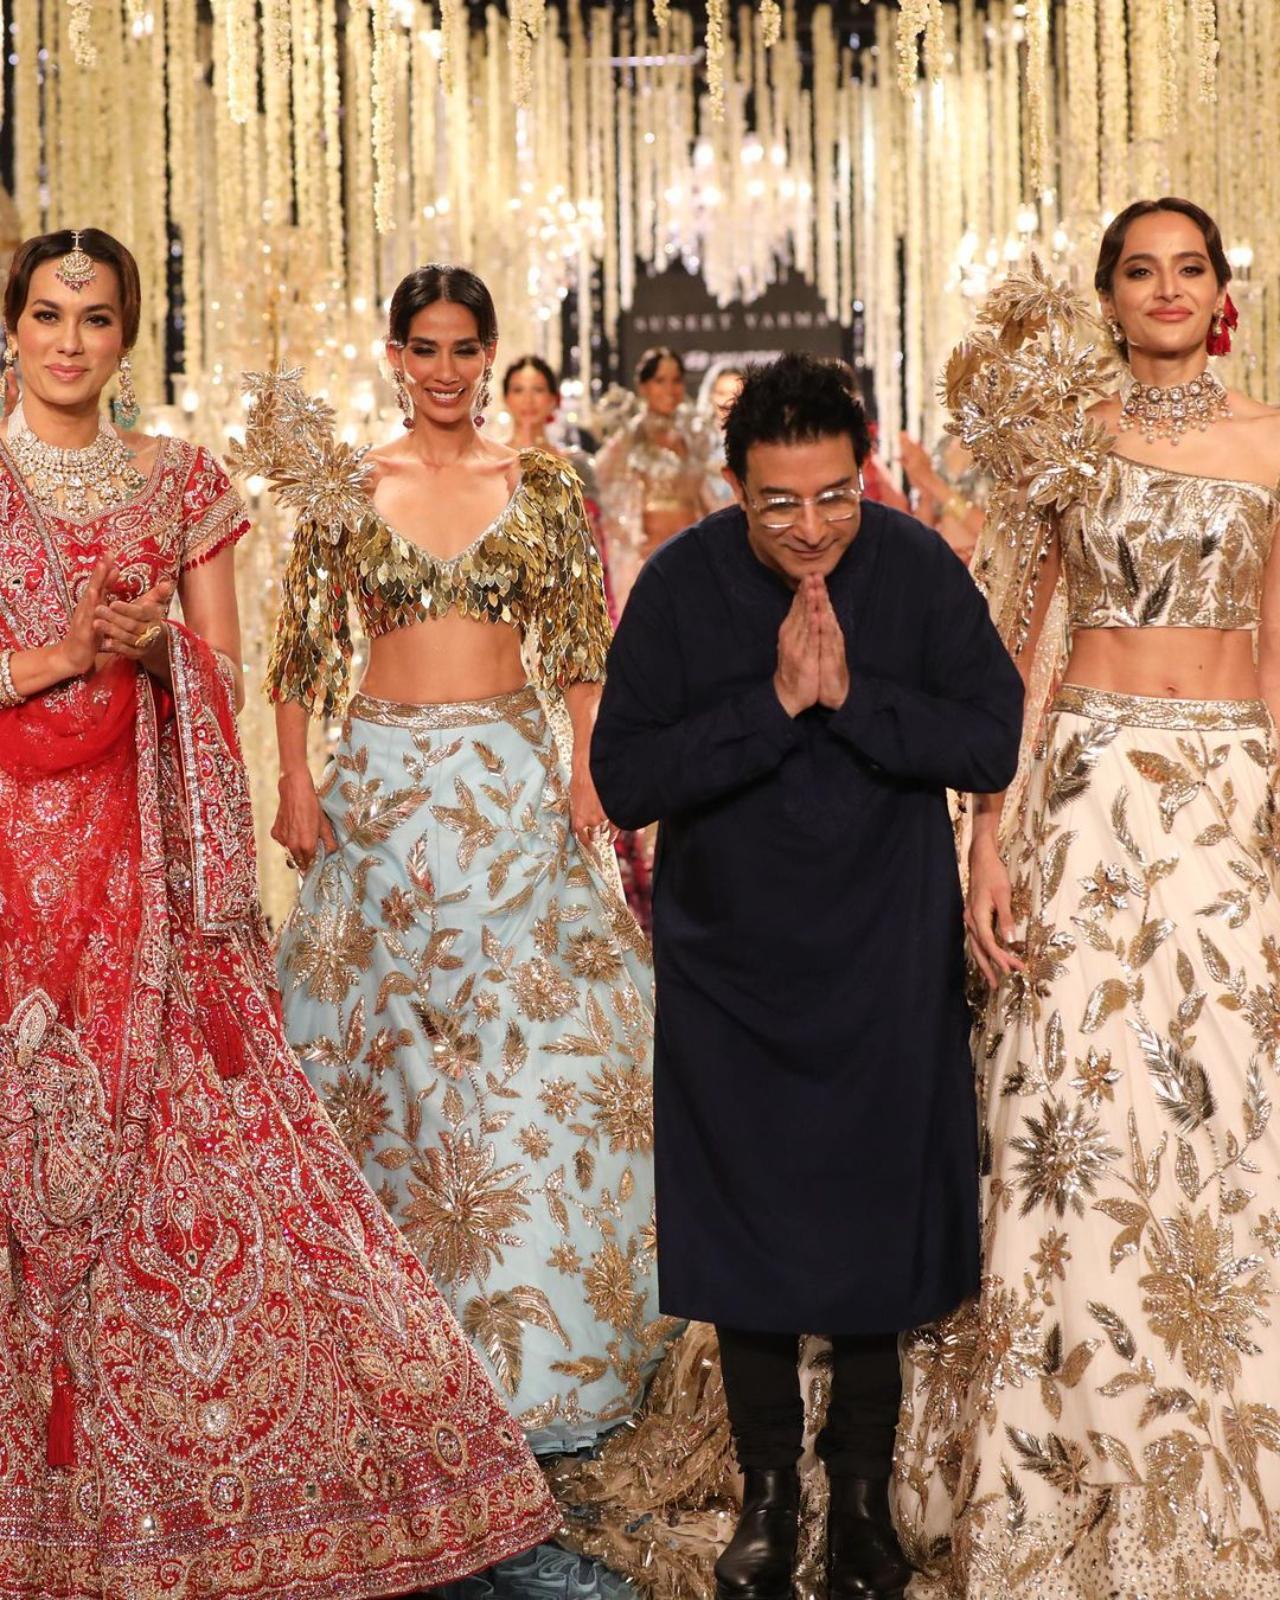 Couturier Suneet Varma presented his collection 'Mogra' at India Couture Week 2023. The collection draws inspiration from the incredible traditional motifs and embroideries found in the India's traditional decorative arts. It brings out a romantic, feminine and playfully flirtatious aesthetic in its ethnic fits 